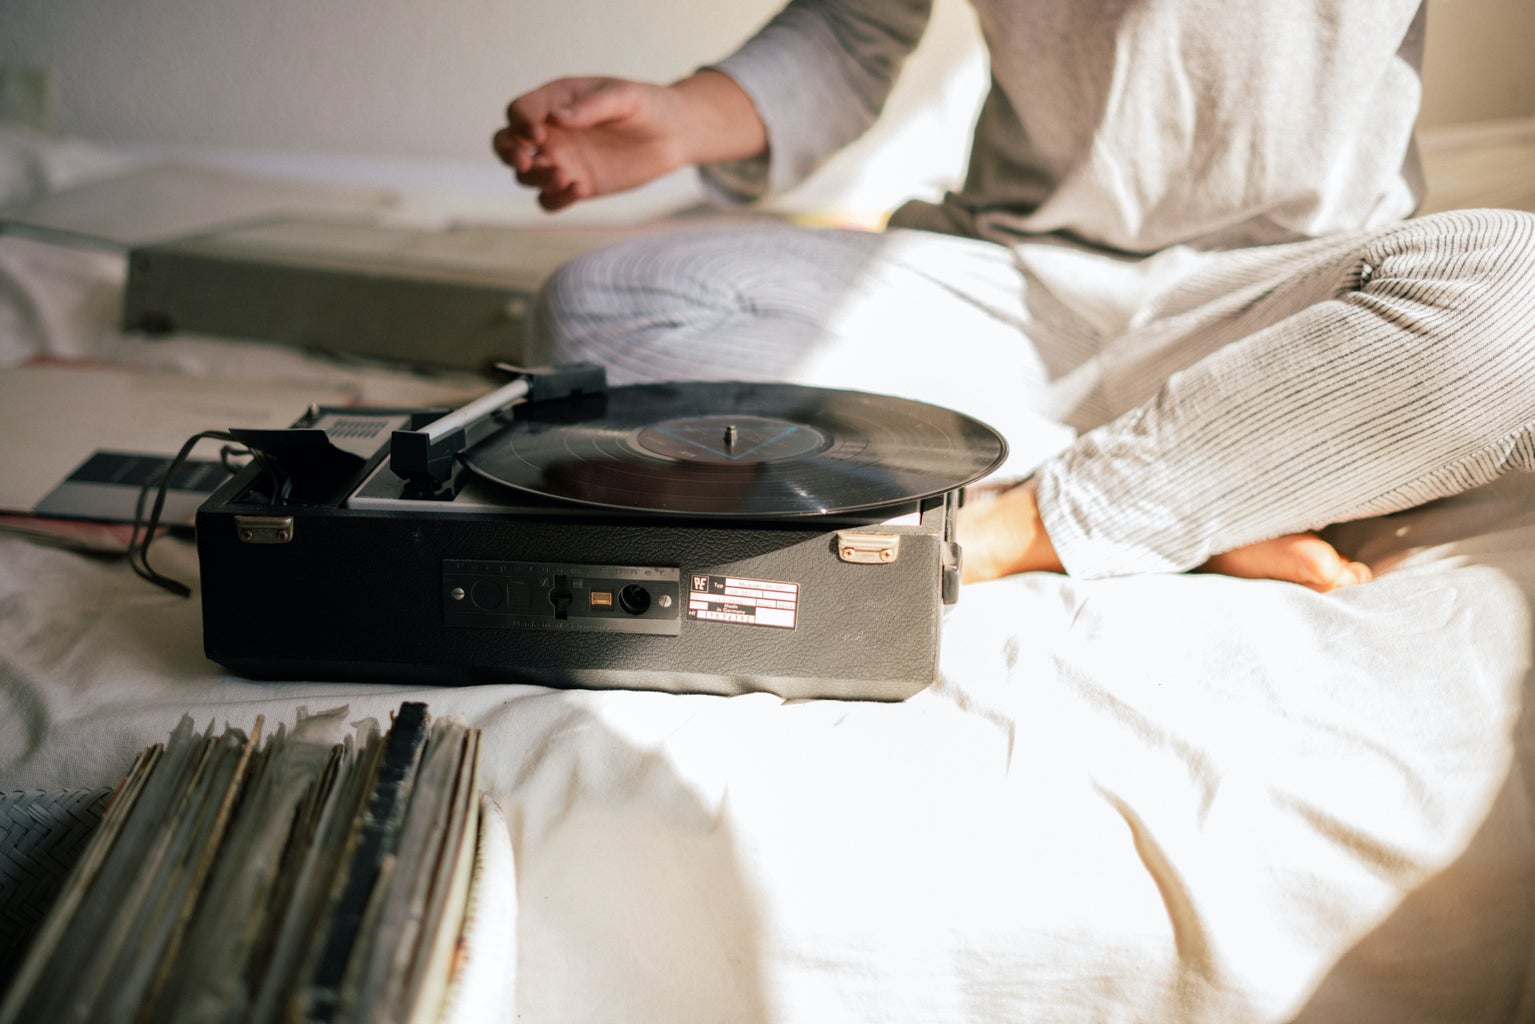 black record player on white bed sheets